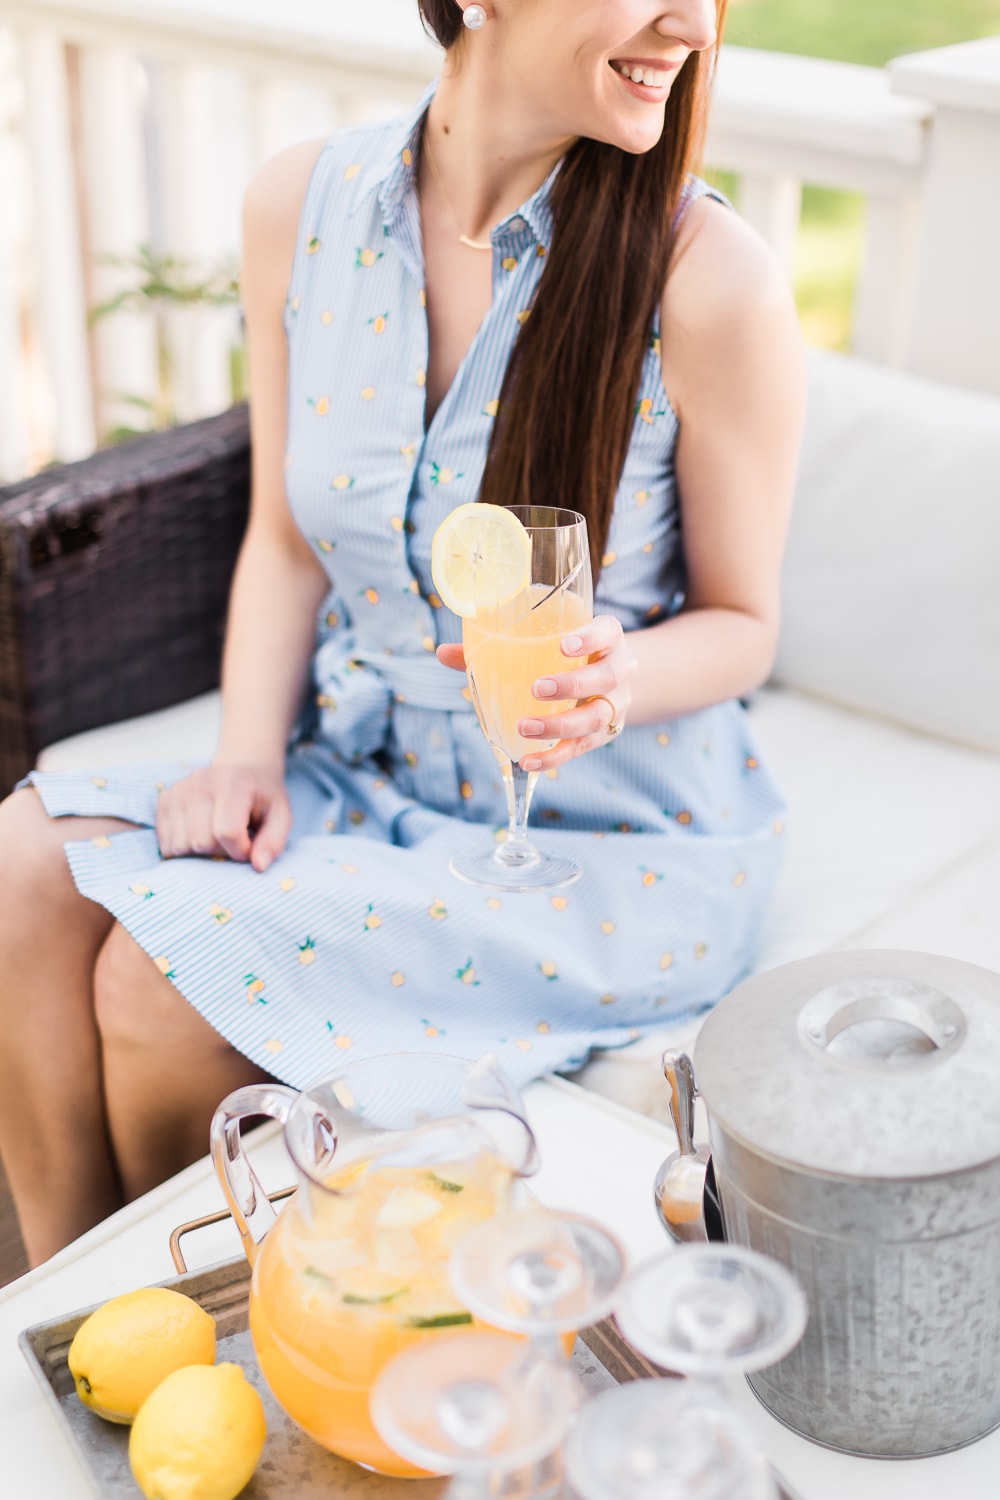 Blogger Stephanie Ziajka shares a refreshing sparkling wine punch made with sparkling Moscato, orange juice, grapefruit juice, St. Germain, lemon juice, and lime juice on Diary of a Debutante